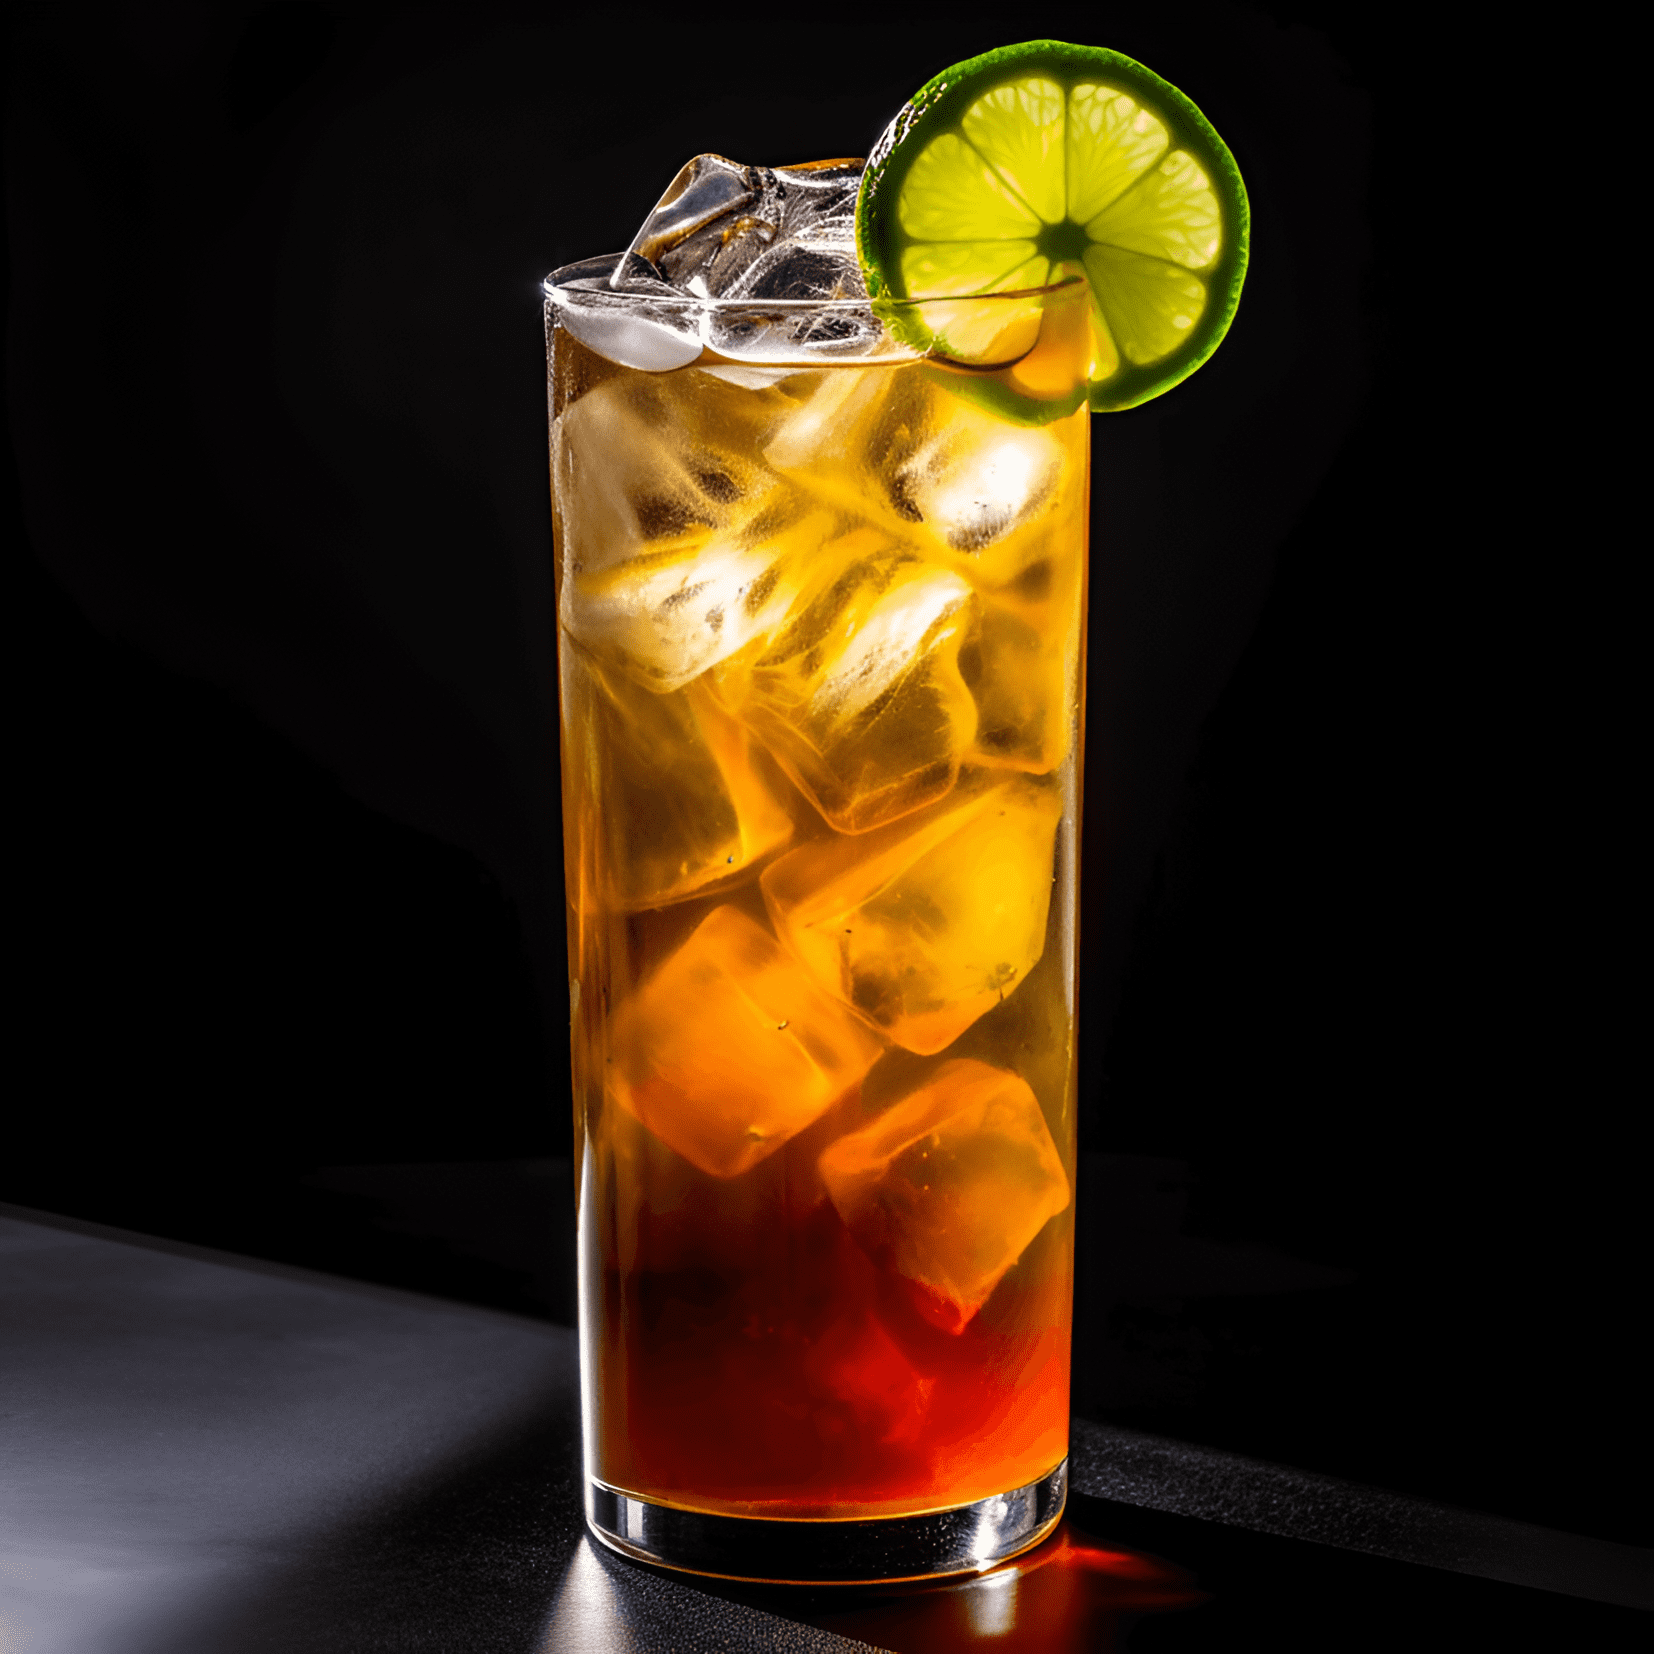 Army Ranger Cocktail Recipe - The Army Ranger cocktail is a powerful blend of flavors, with a strong, bold taste that is both refreshing and invigorating. The combination of whiskey, lime juice, and ginger beer creates a spicy, tangy, and slightly sweet flavor profile, while the addition of mint leaves adds a cool, refreshing finish.